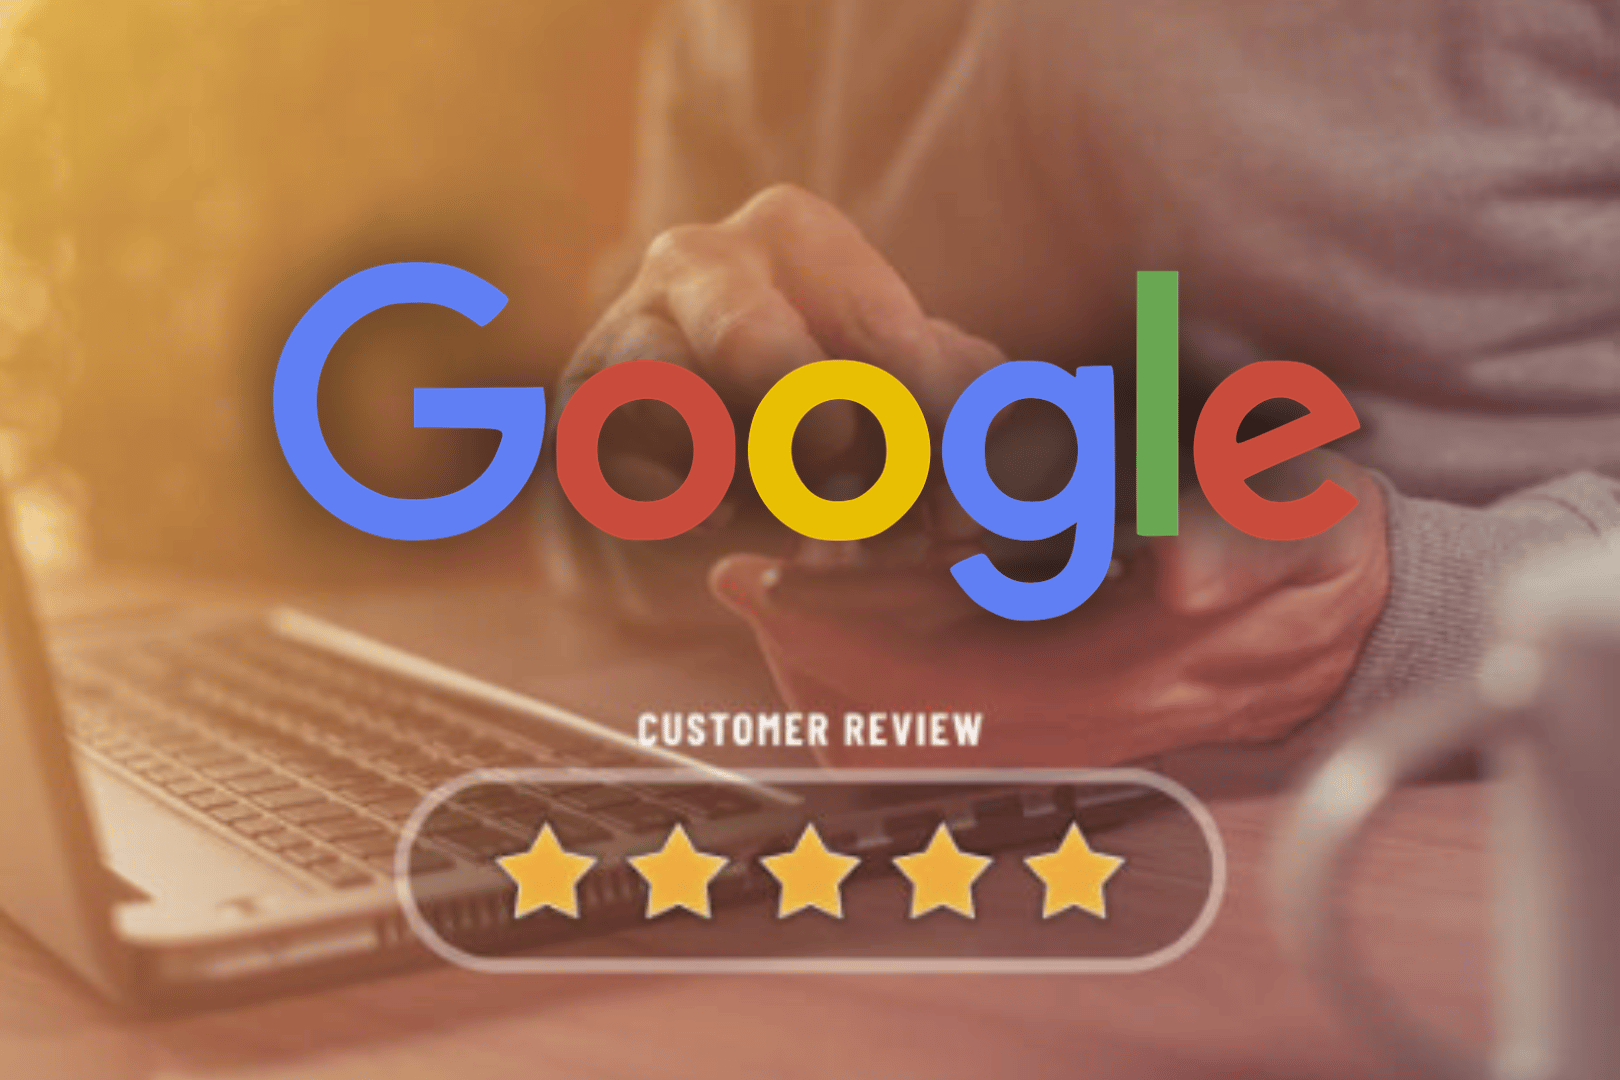 Google logo and stars review